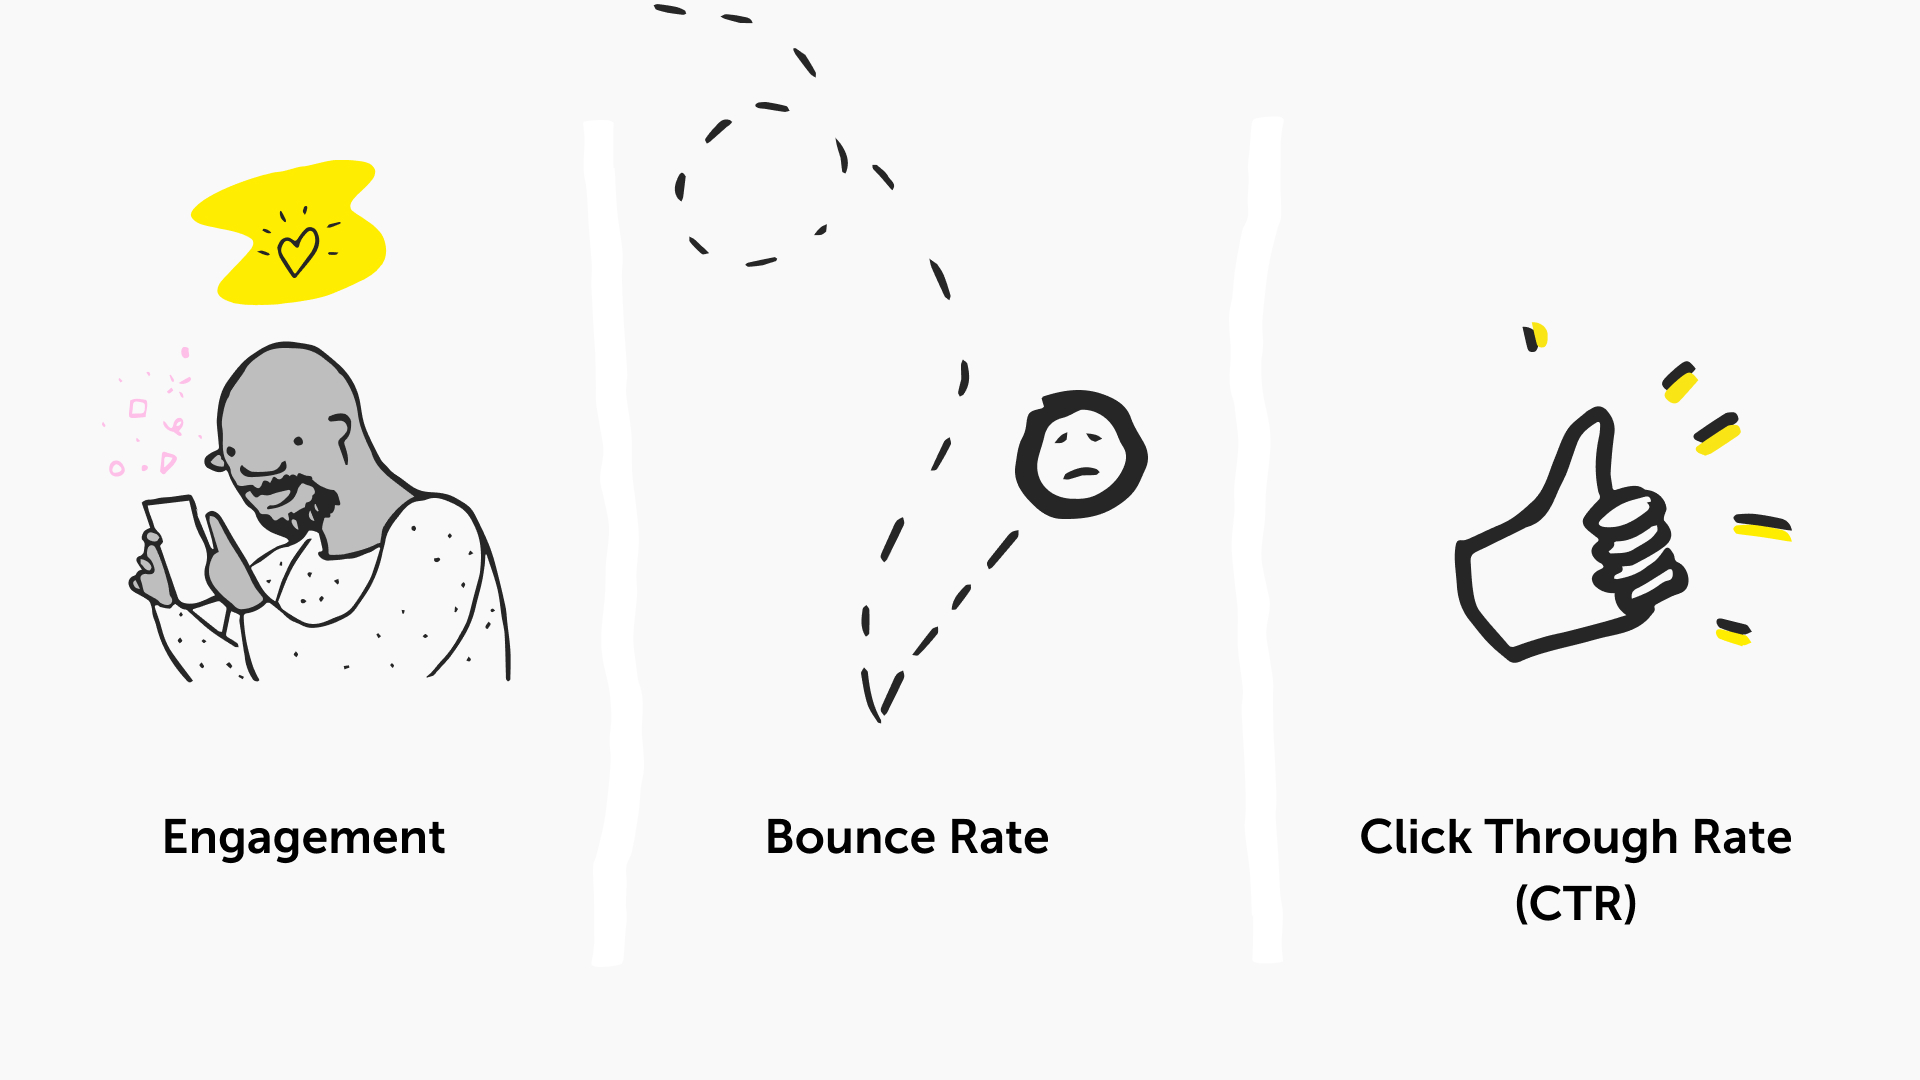 A graphic split into three sections demonstrating key SEO metrics influenced by UX: Engagement, with an icon of a person using a phone with hearts around, Bounce Rate, with a sad face bouncing off a line, and Click Through Rate (CTR), shown as a hand giving a thumbs up.